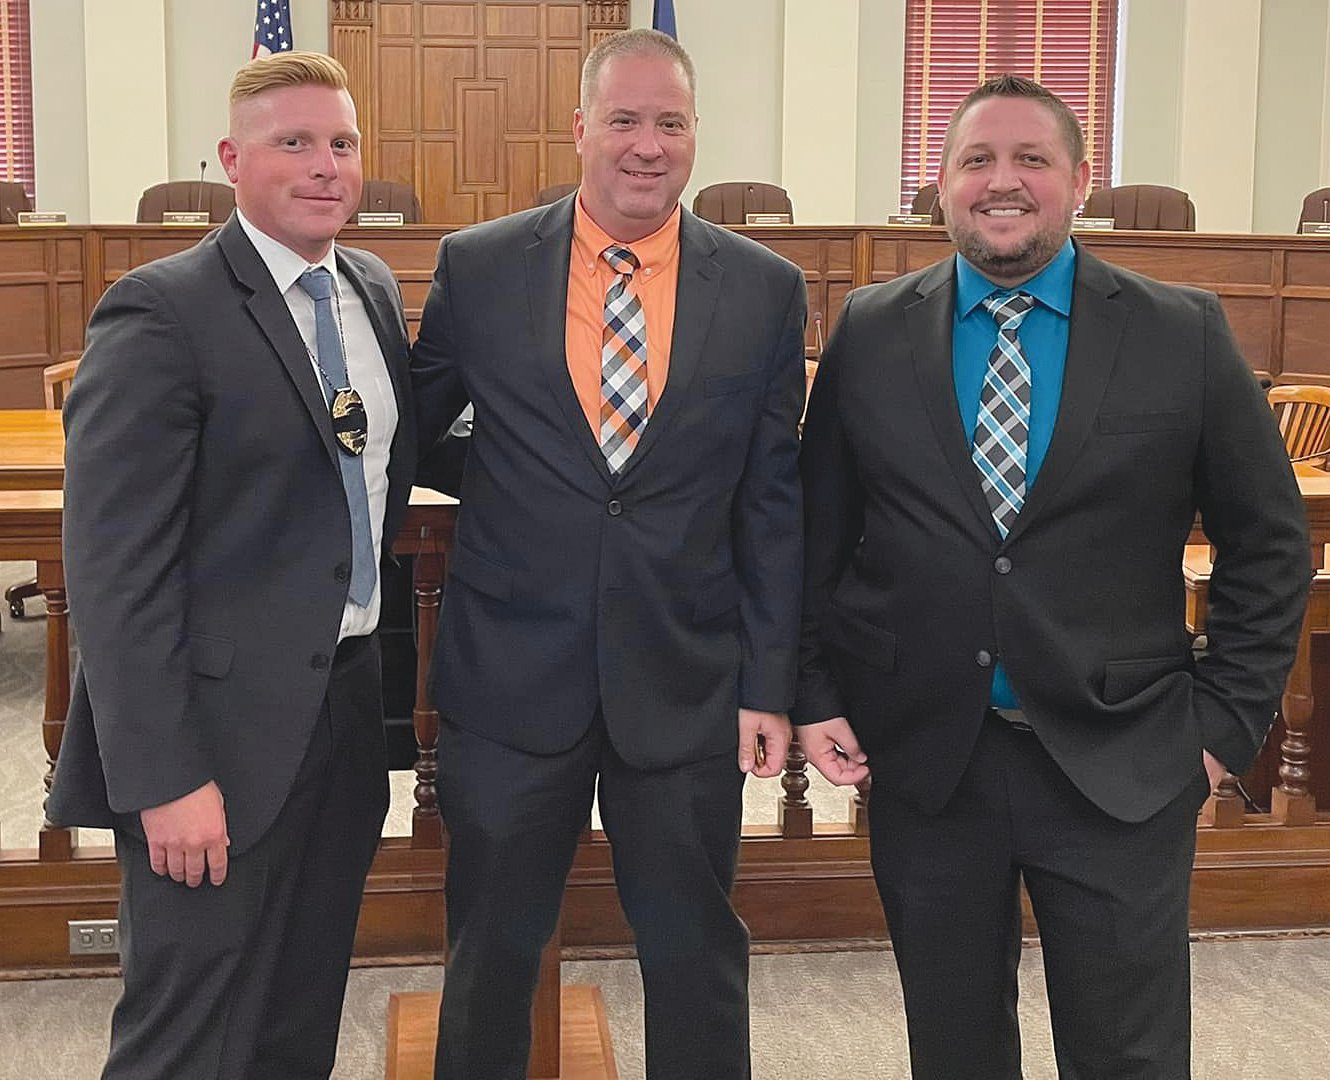 The Crawfordsville Police Department conducted a promotion ceremony on Tuesday at the City Building. Detective Sgt. Jared Templeman, left, was promoted to Detective Lieutenant; Sergeant Jared Colley, center, was promoted to Lieutenant; and Officer Kevin Cornell, right, was been promoted to Sergeant.